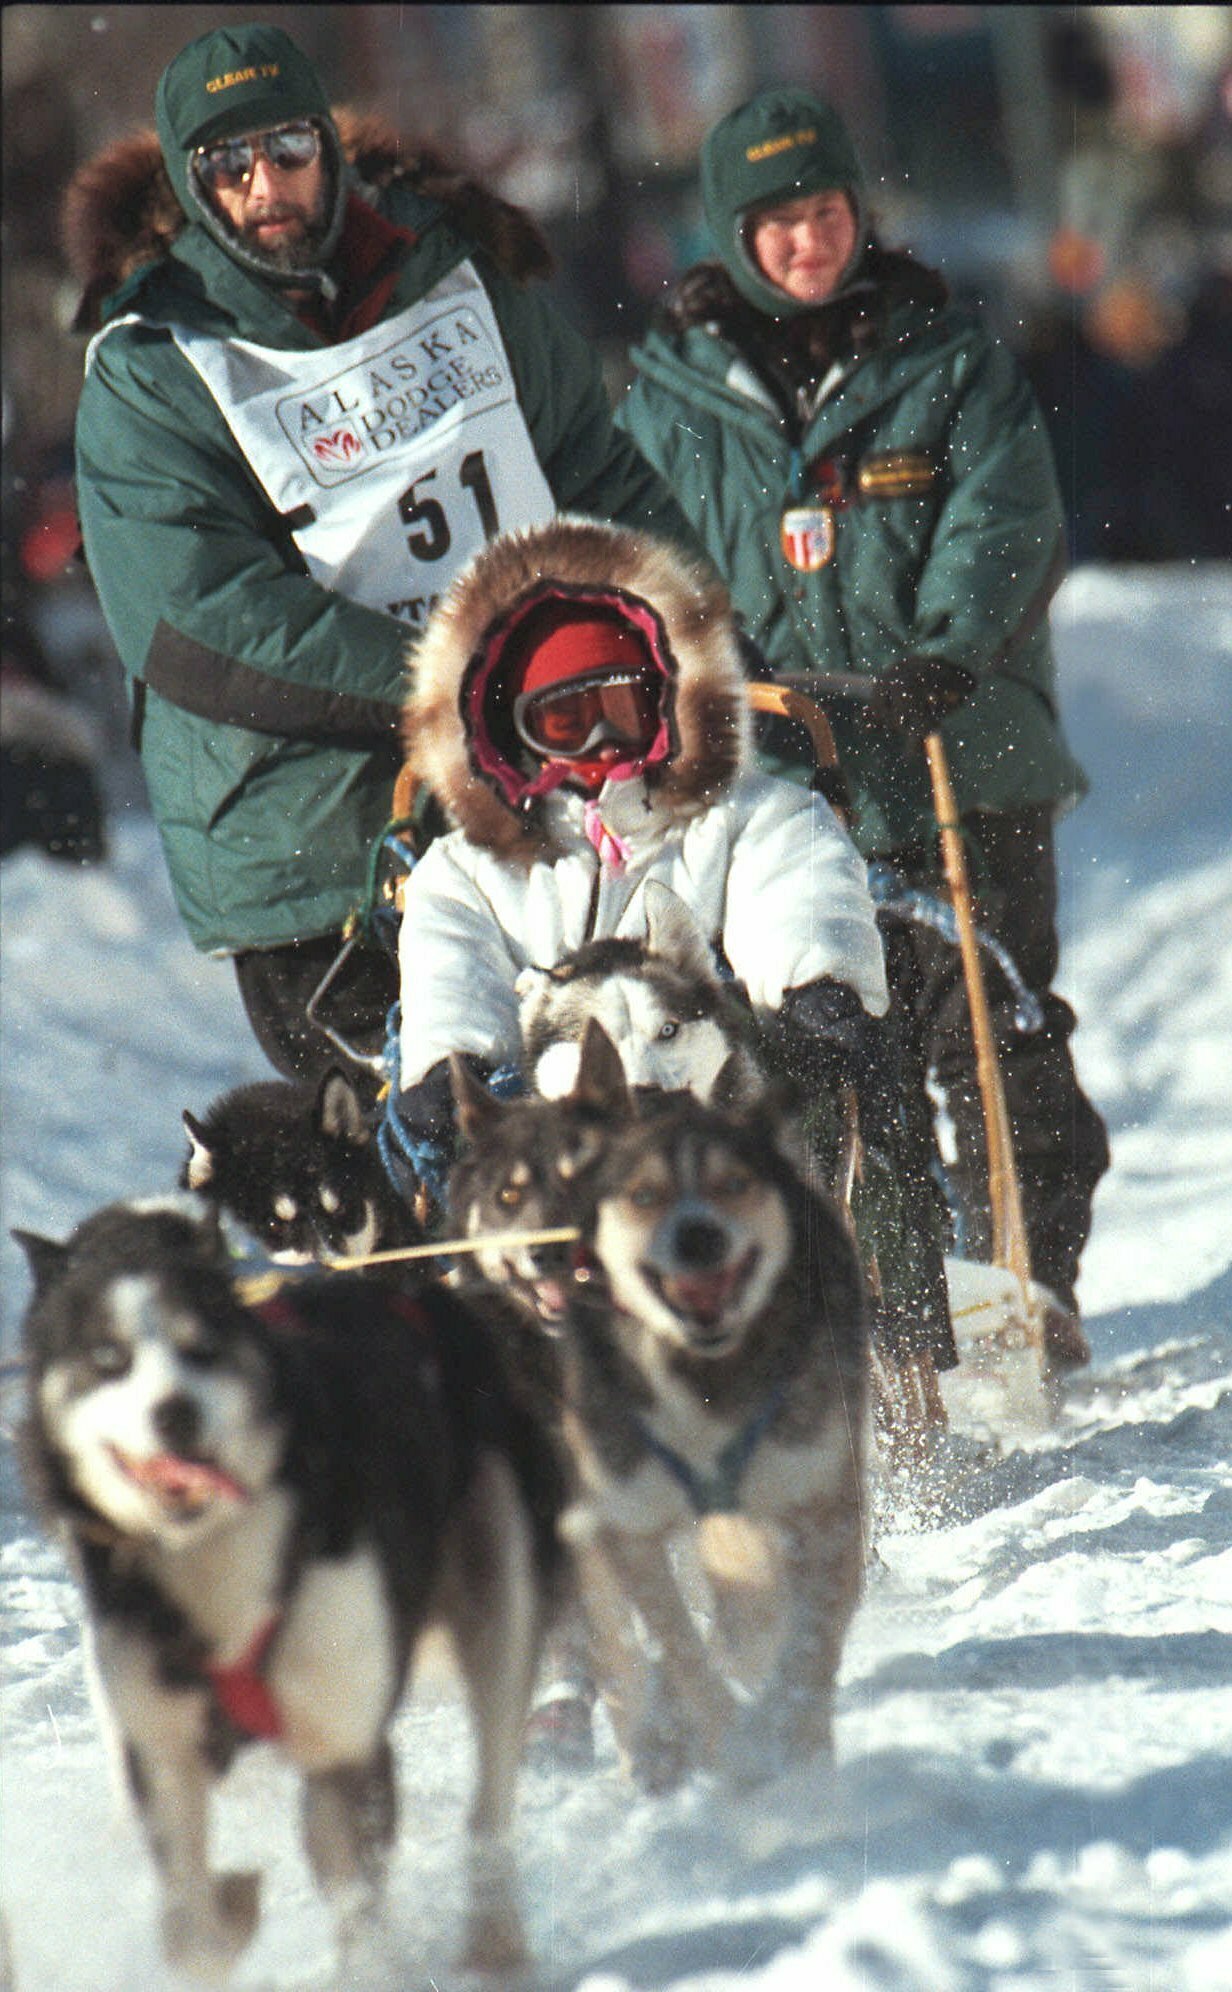 Cancer claims Iditarod champion Rick Mackey. His father and brother also won famed Alaska race | KLRT [Video]